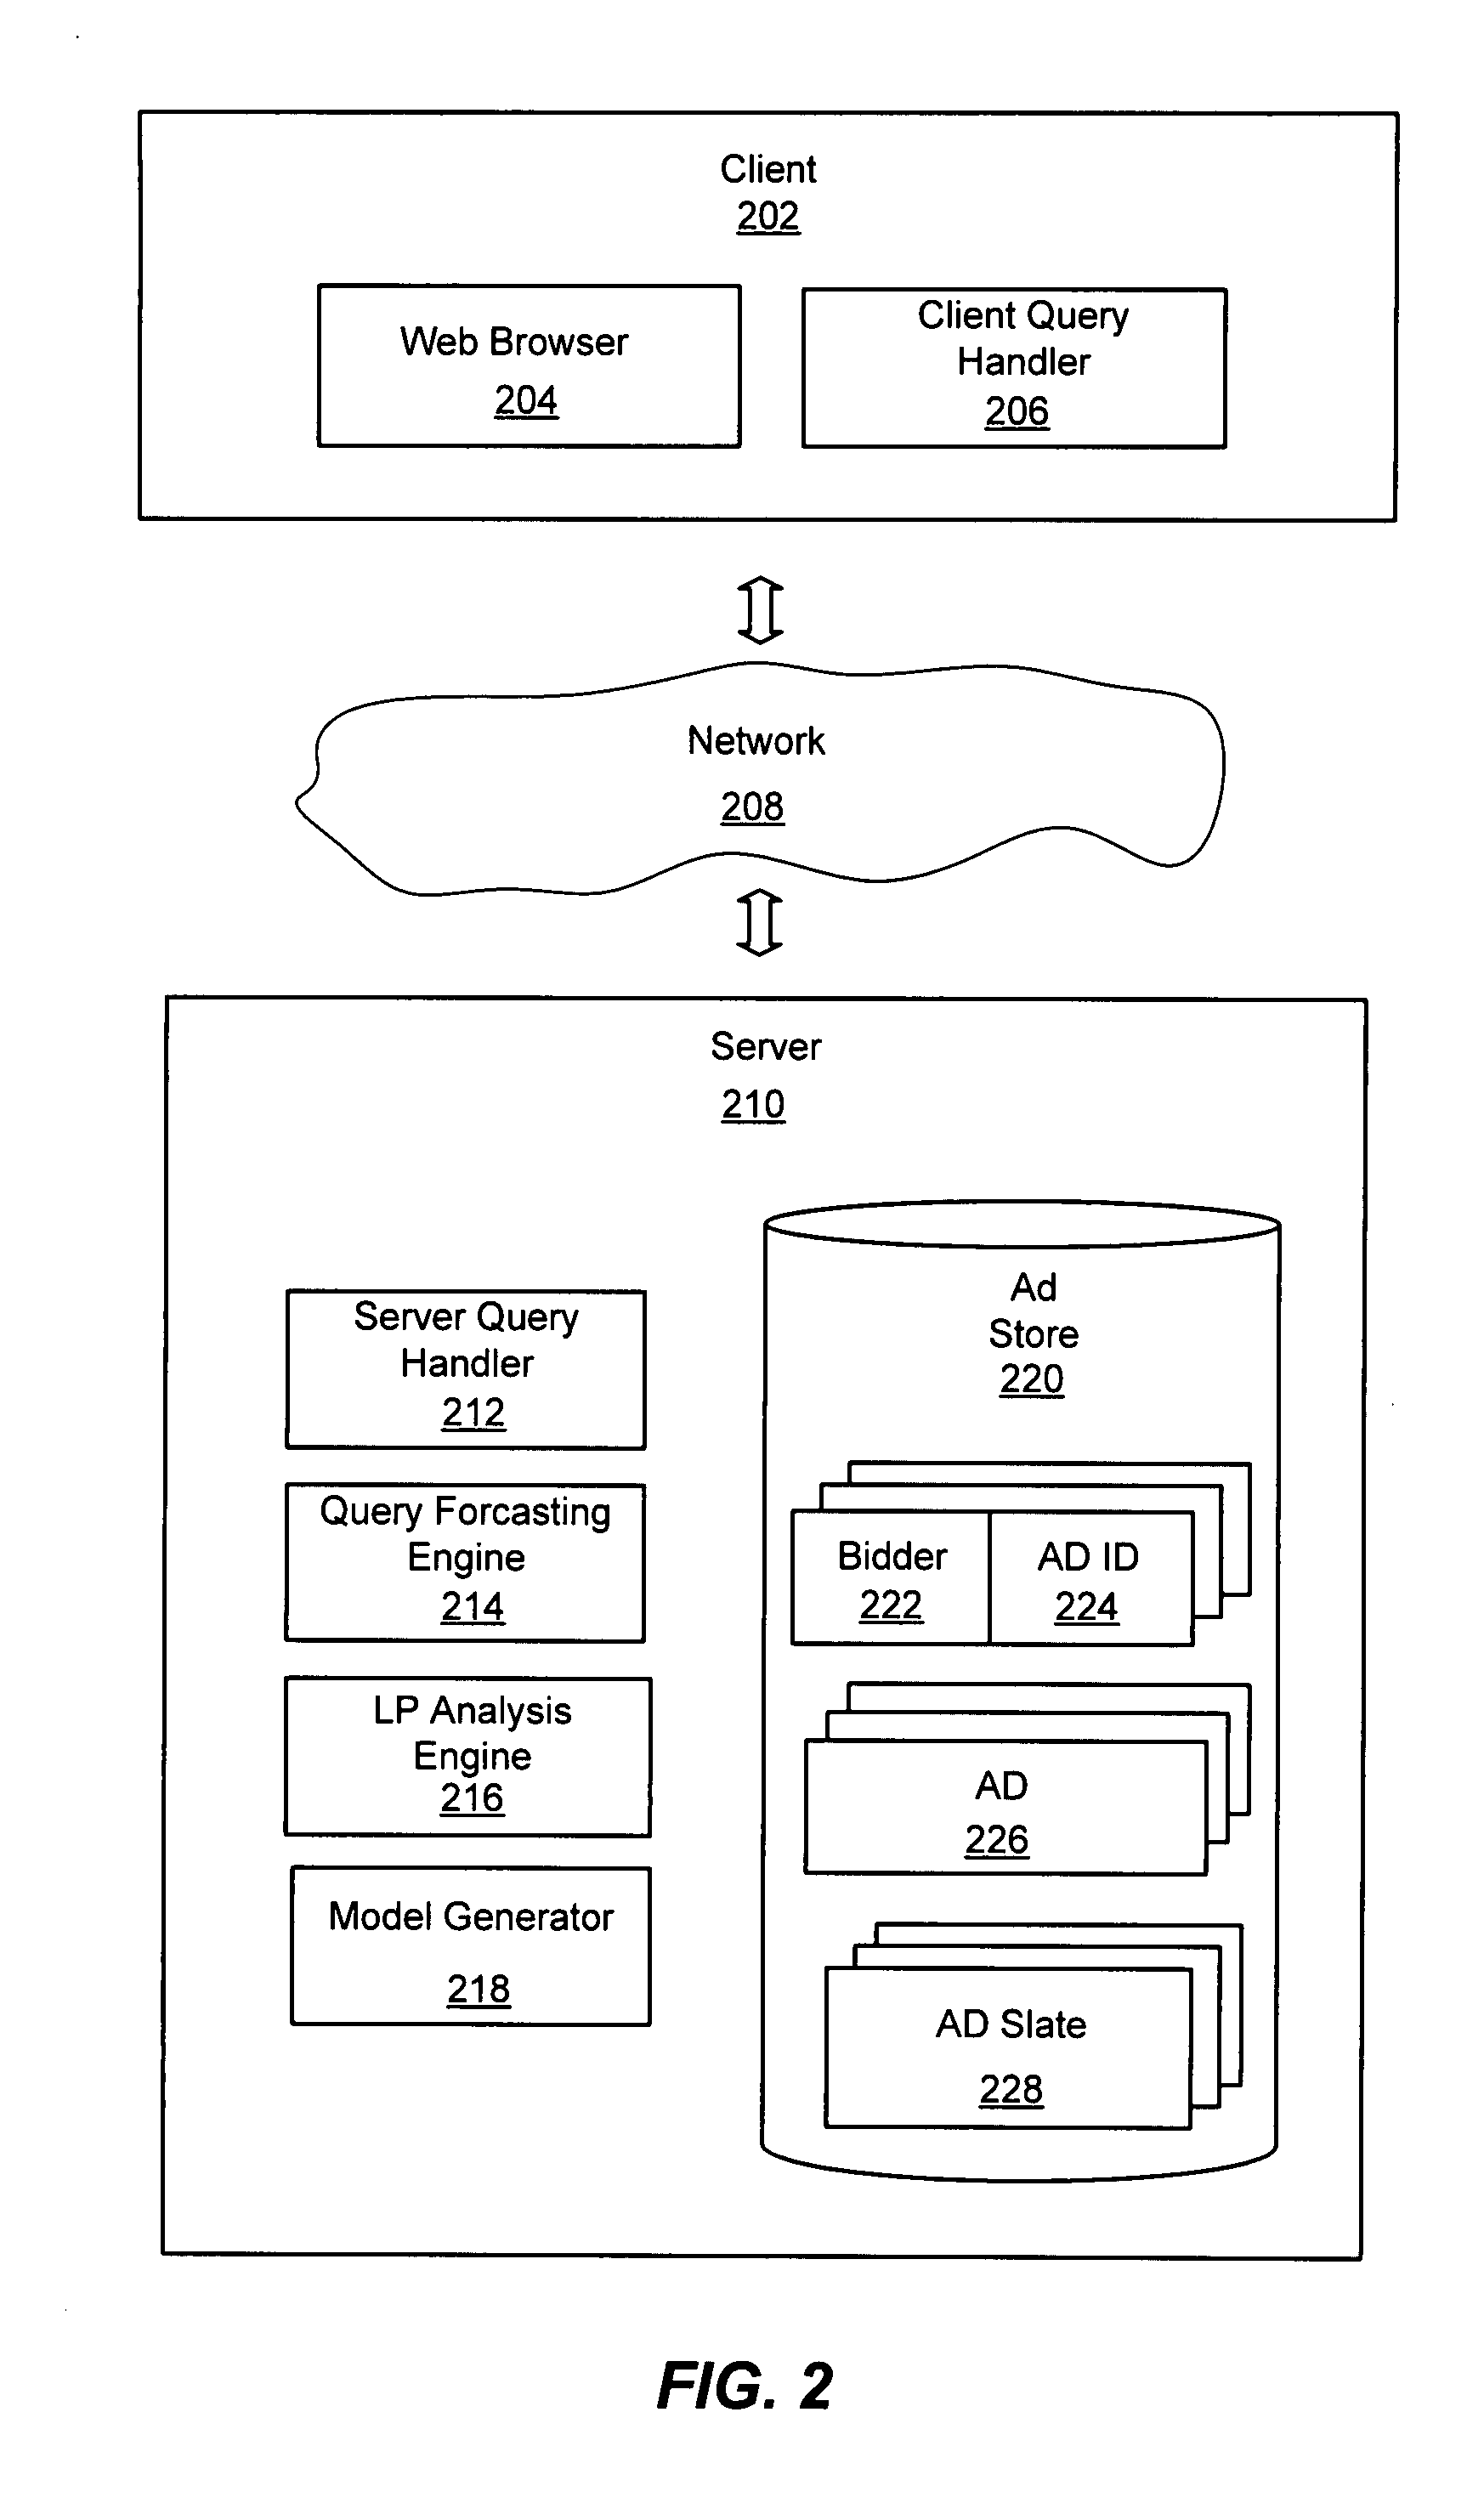 System and method for scheduling online keyword auctions over multiple time periods subject to budget and query volume constraints